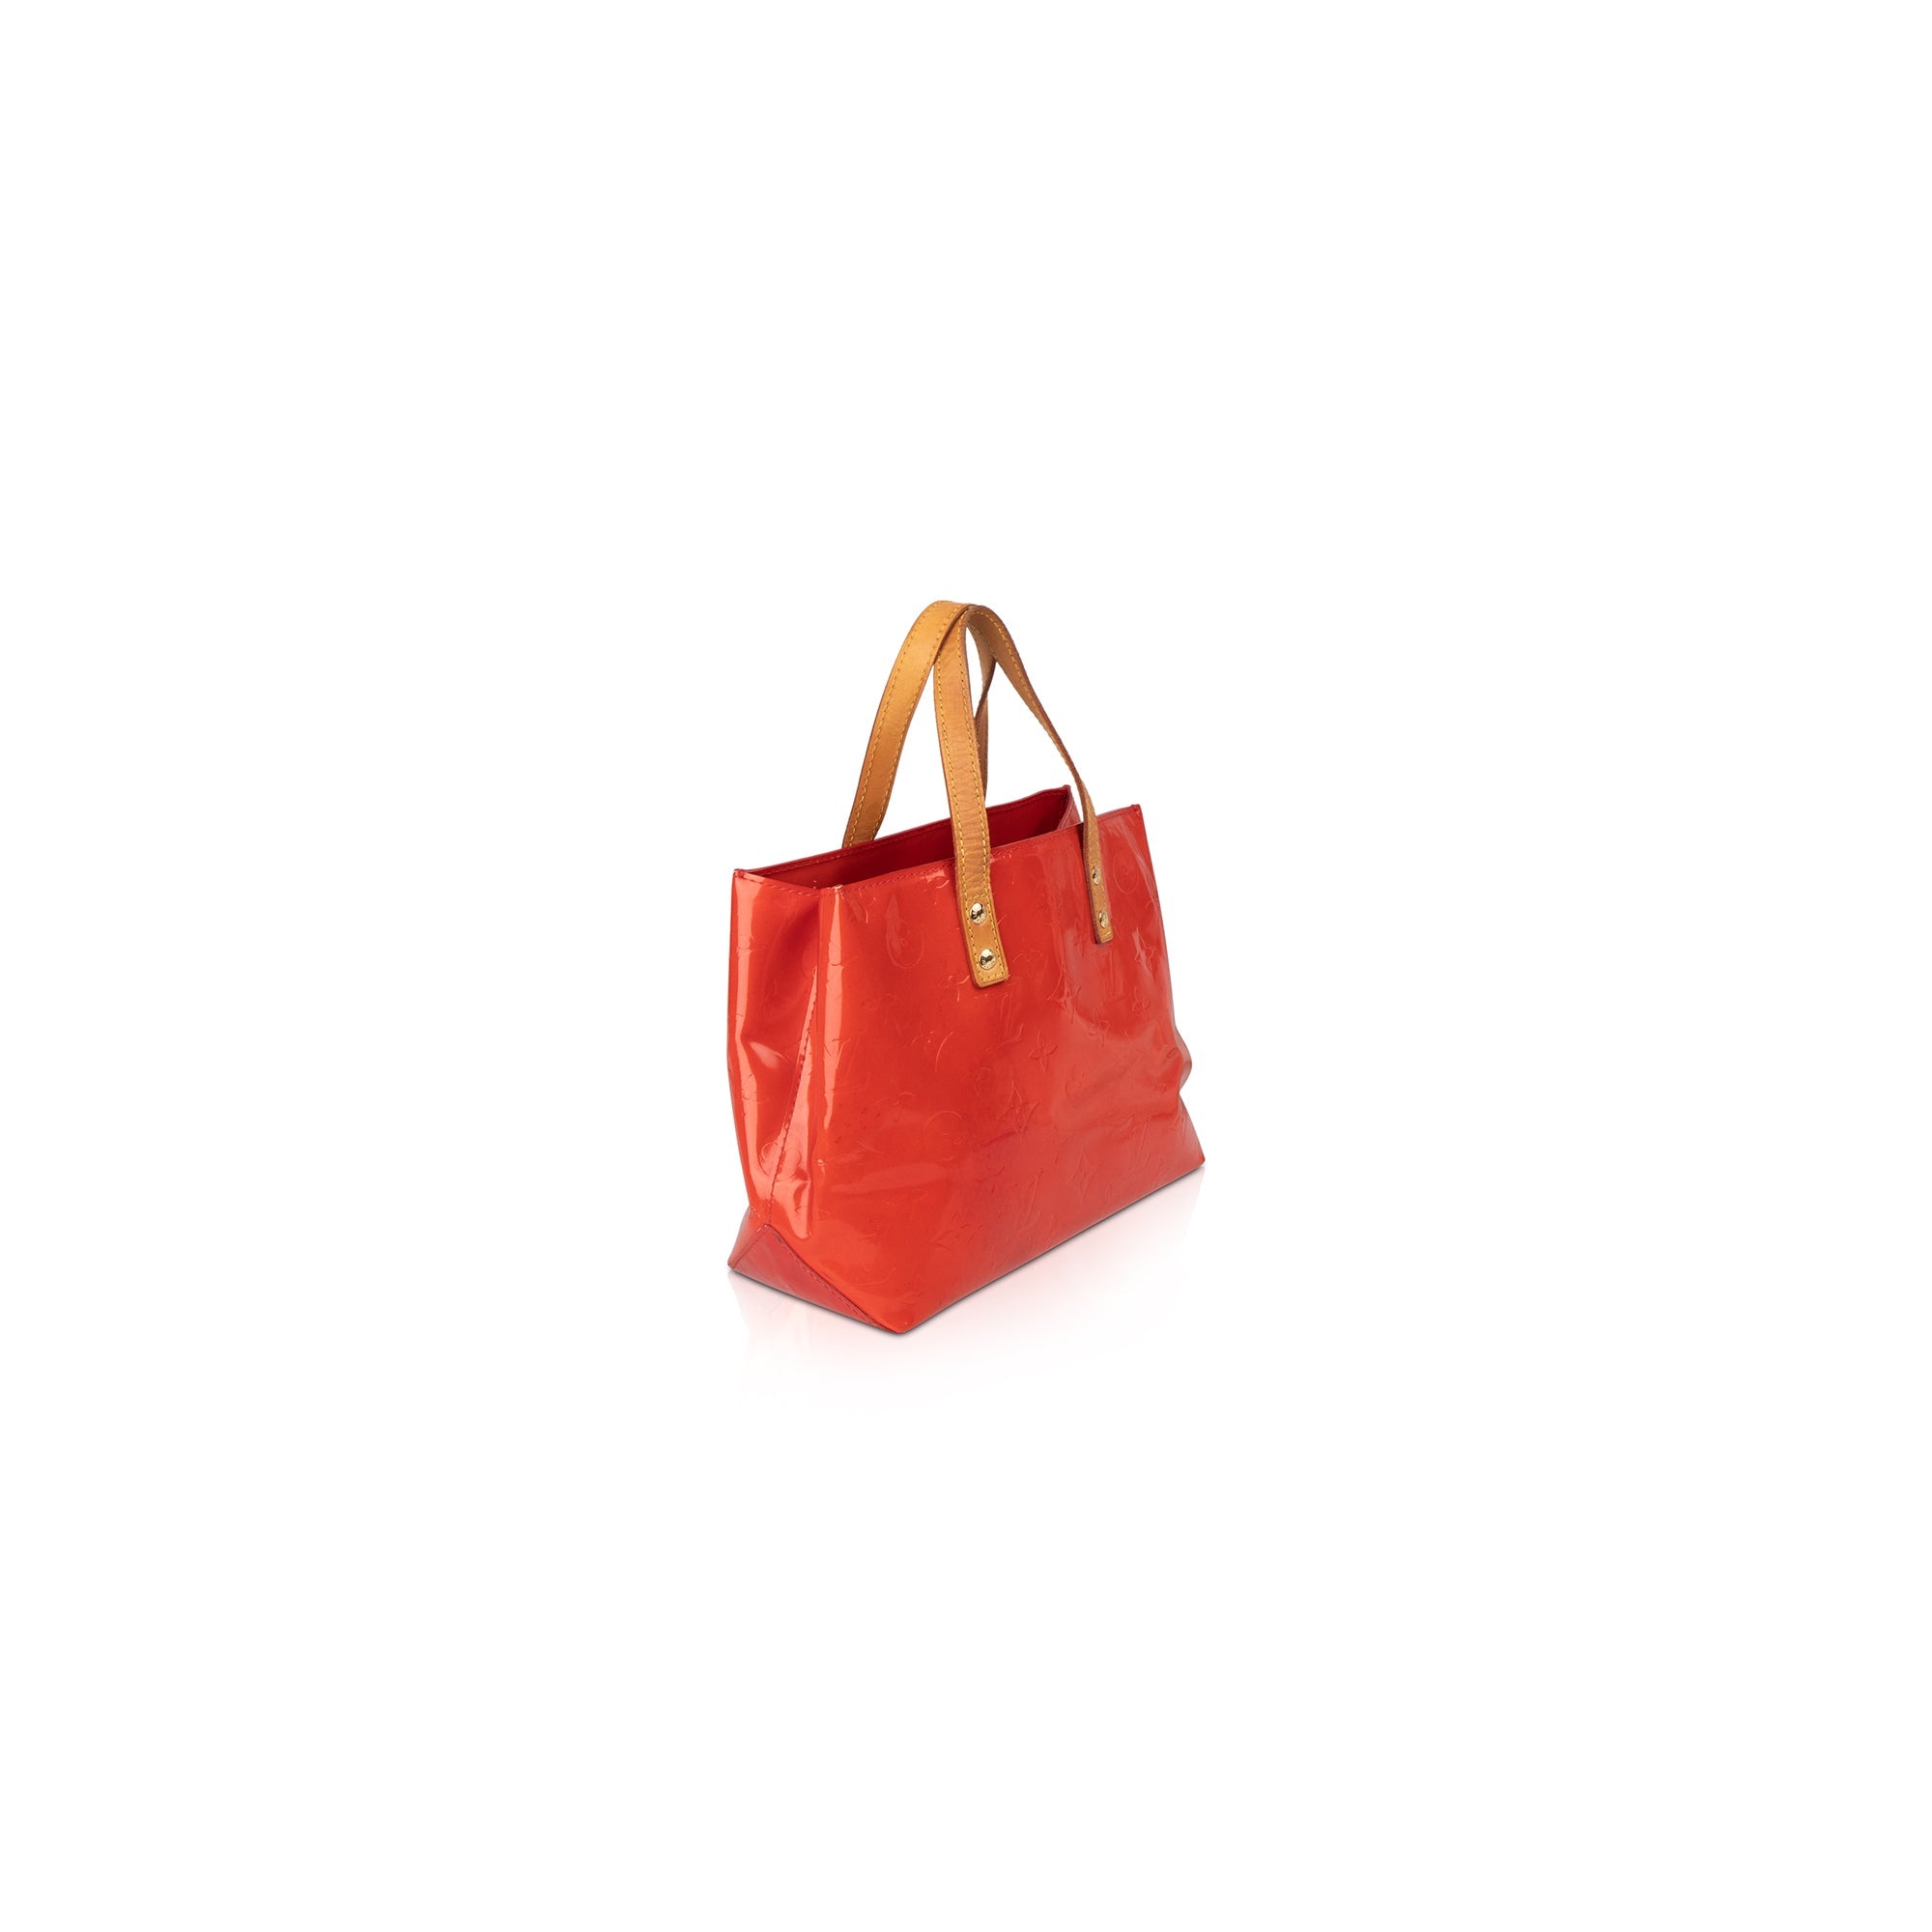 Louis Vuitton Vernis Reade PM Tote – Oliver Jewellery